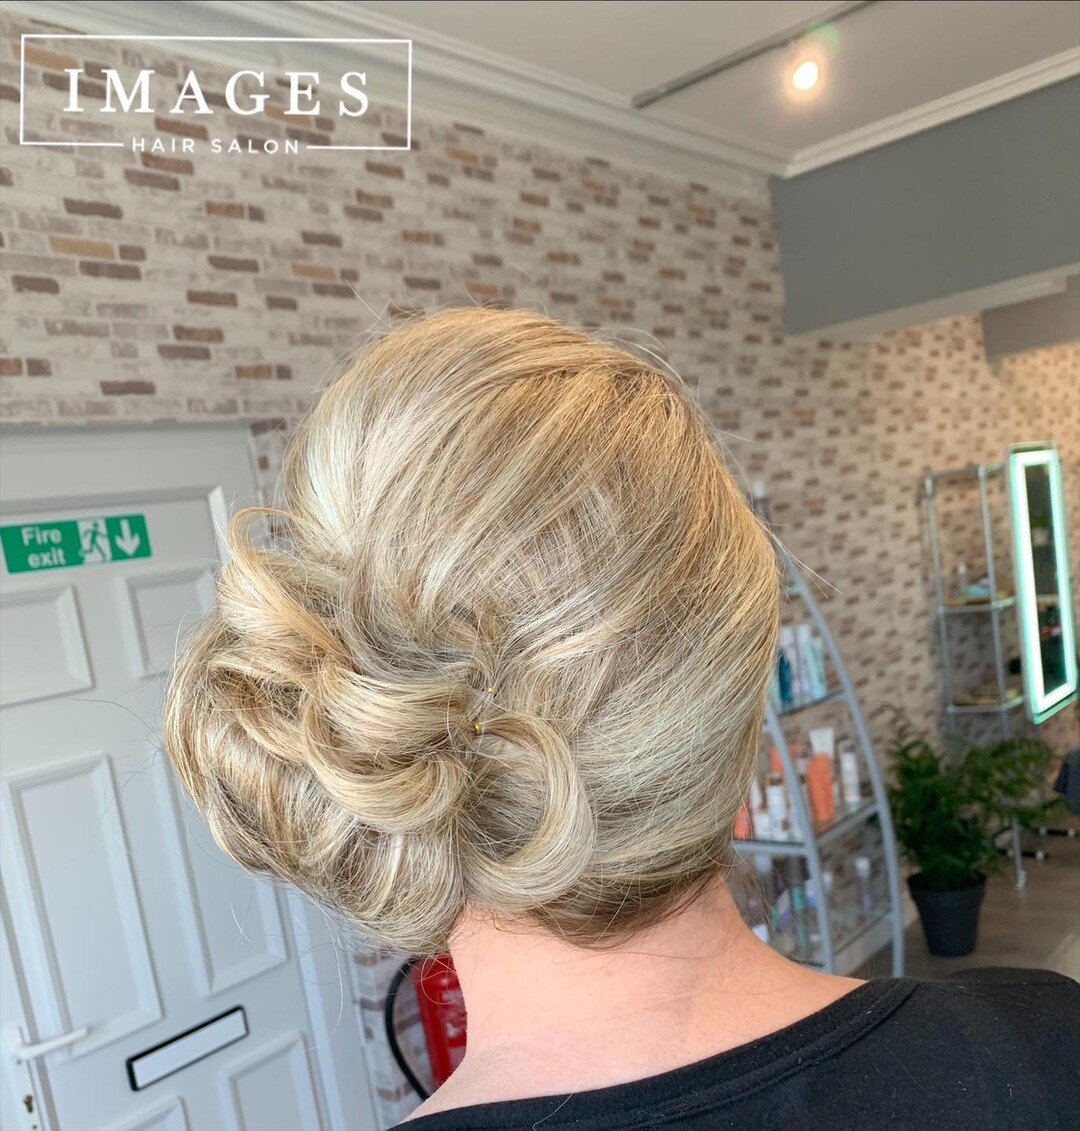 Lovely soft up do created by Sam Grinter 
Weddings proms and special occasion hair available